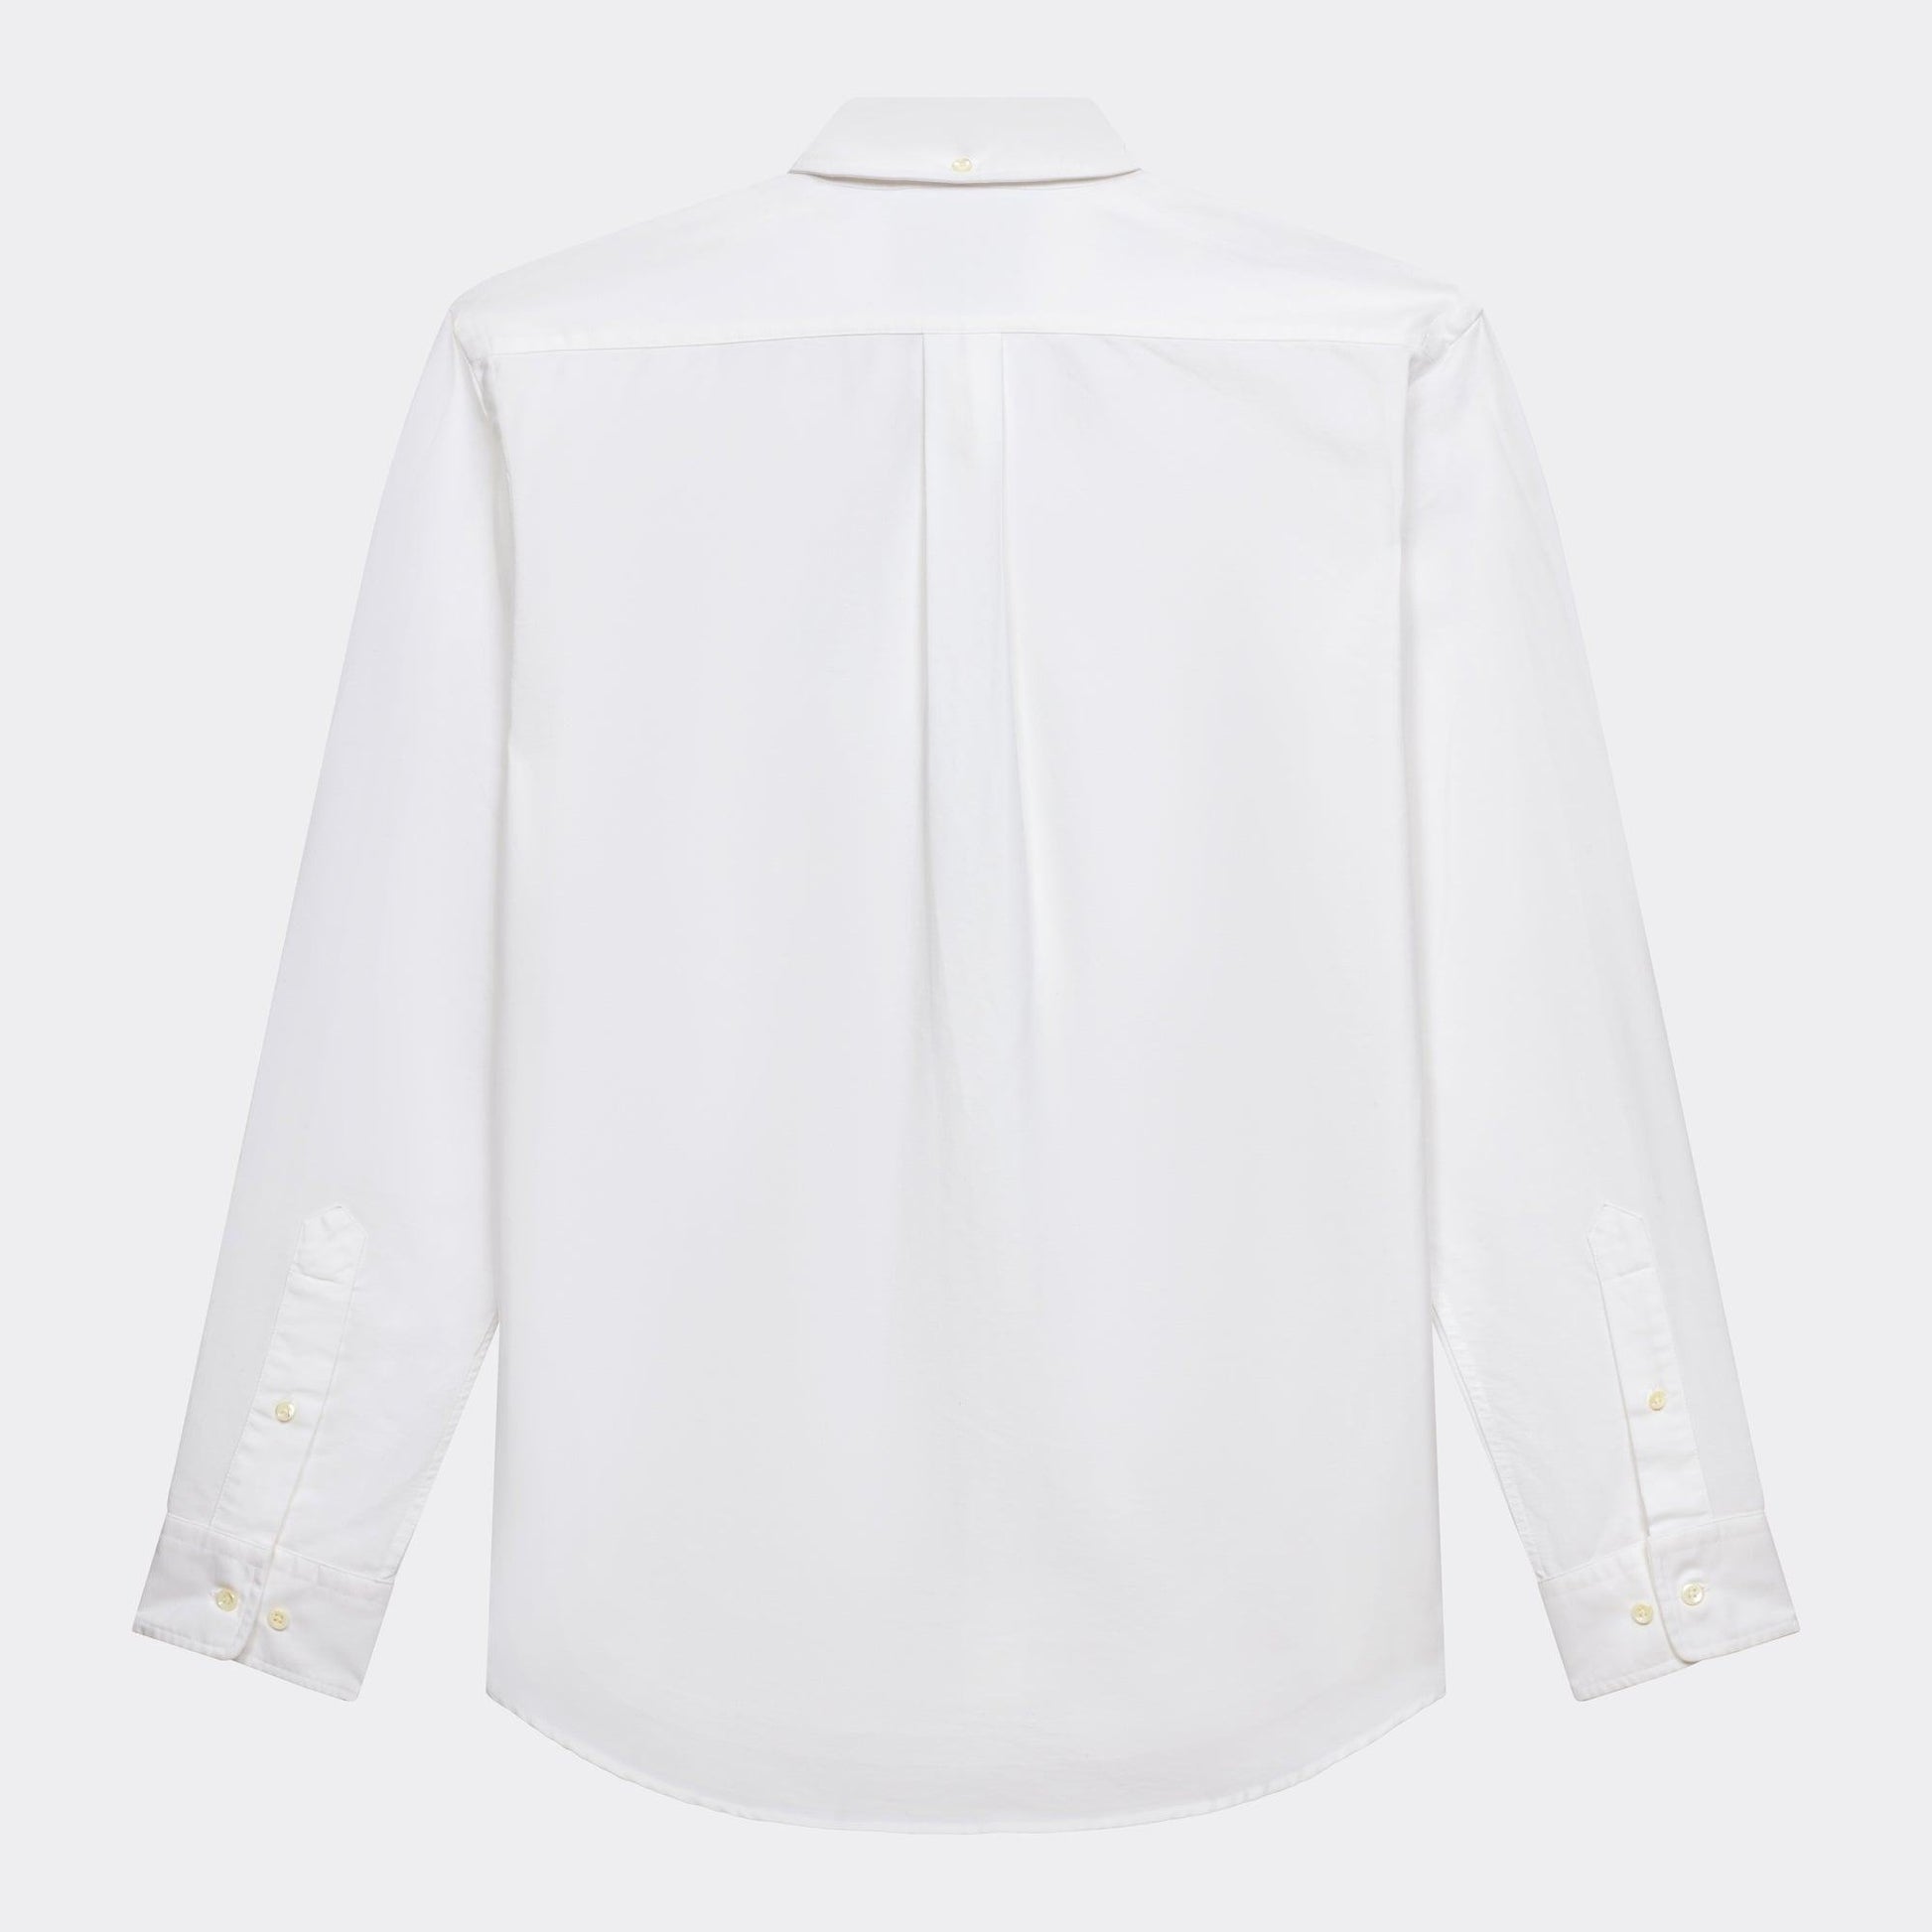 Chemise oxford button down blanche - Champ de Manoeuvres 